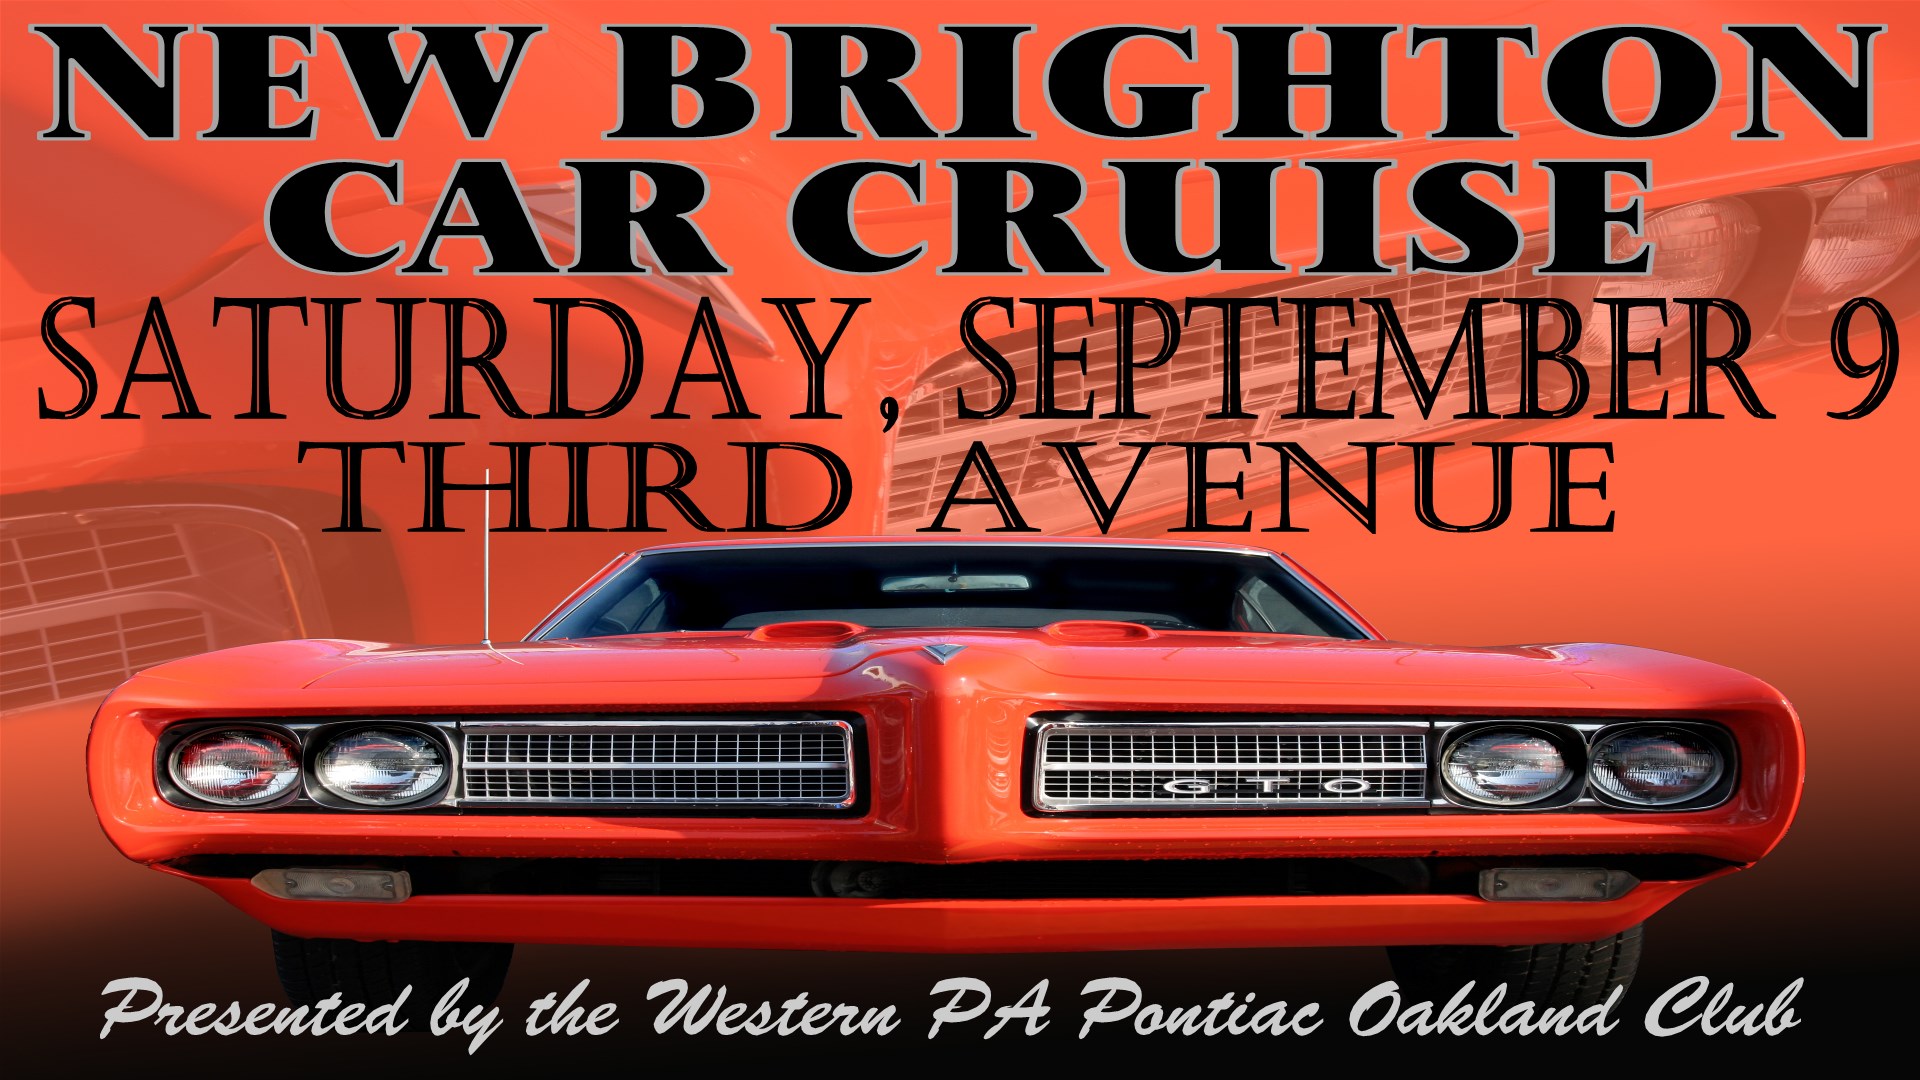 New Brighton Car Cruise SPG Events and Festivals